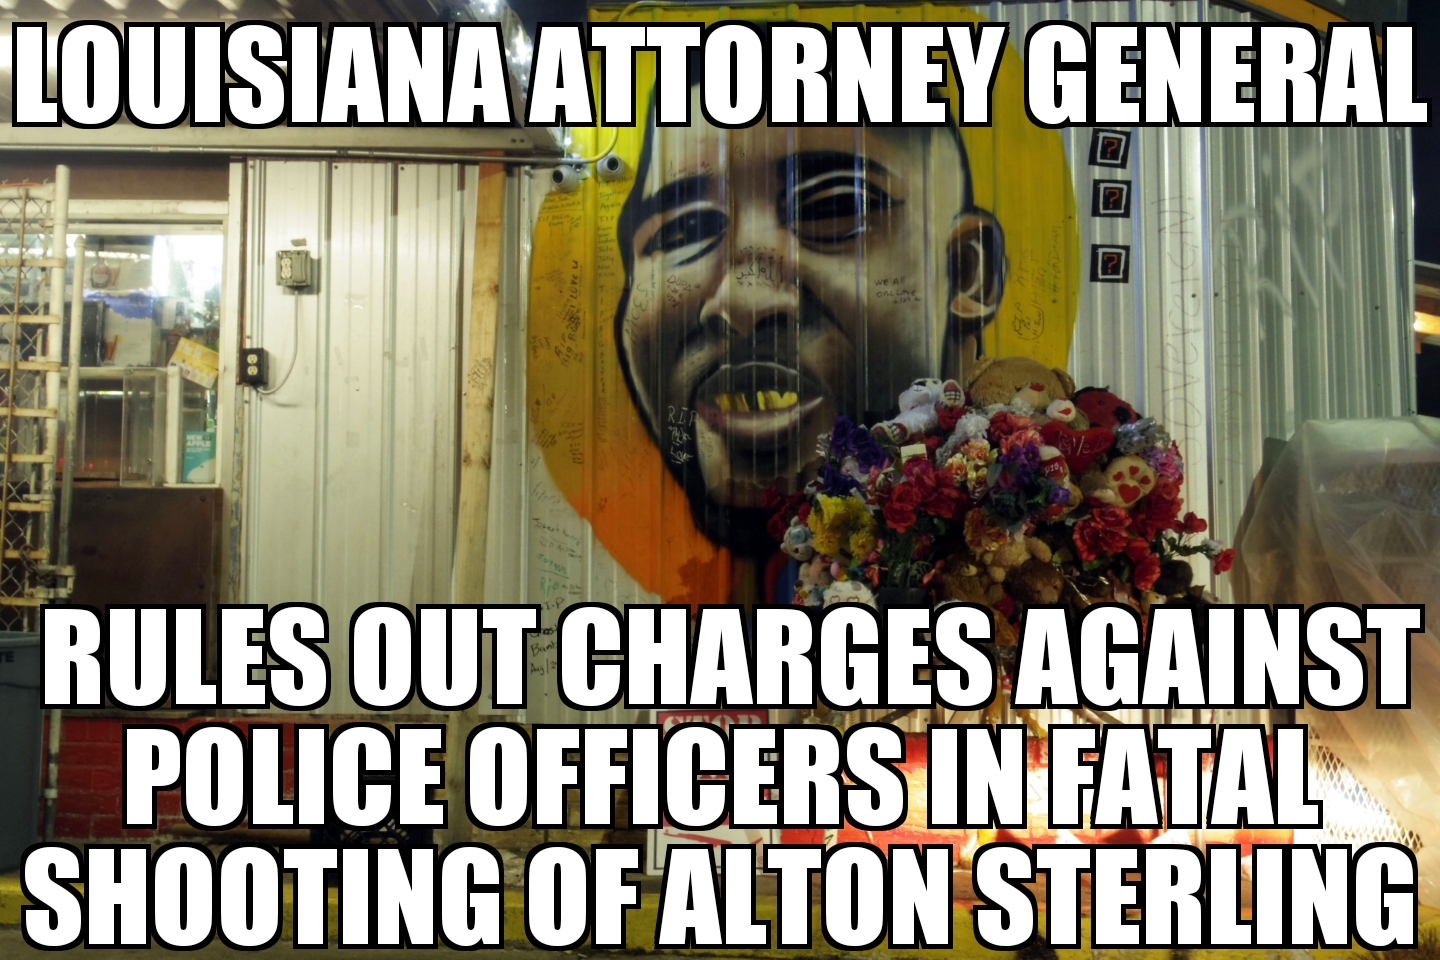 No charges for officers in Alton Sterling shooting